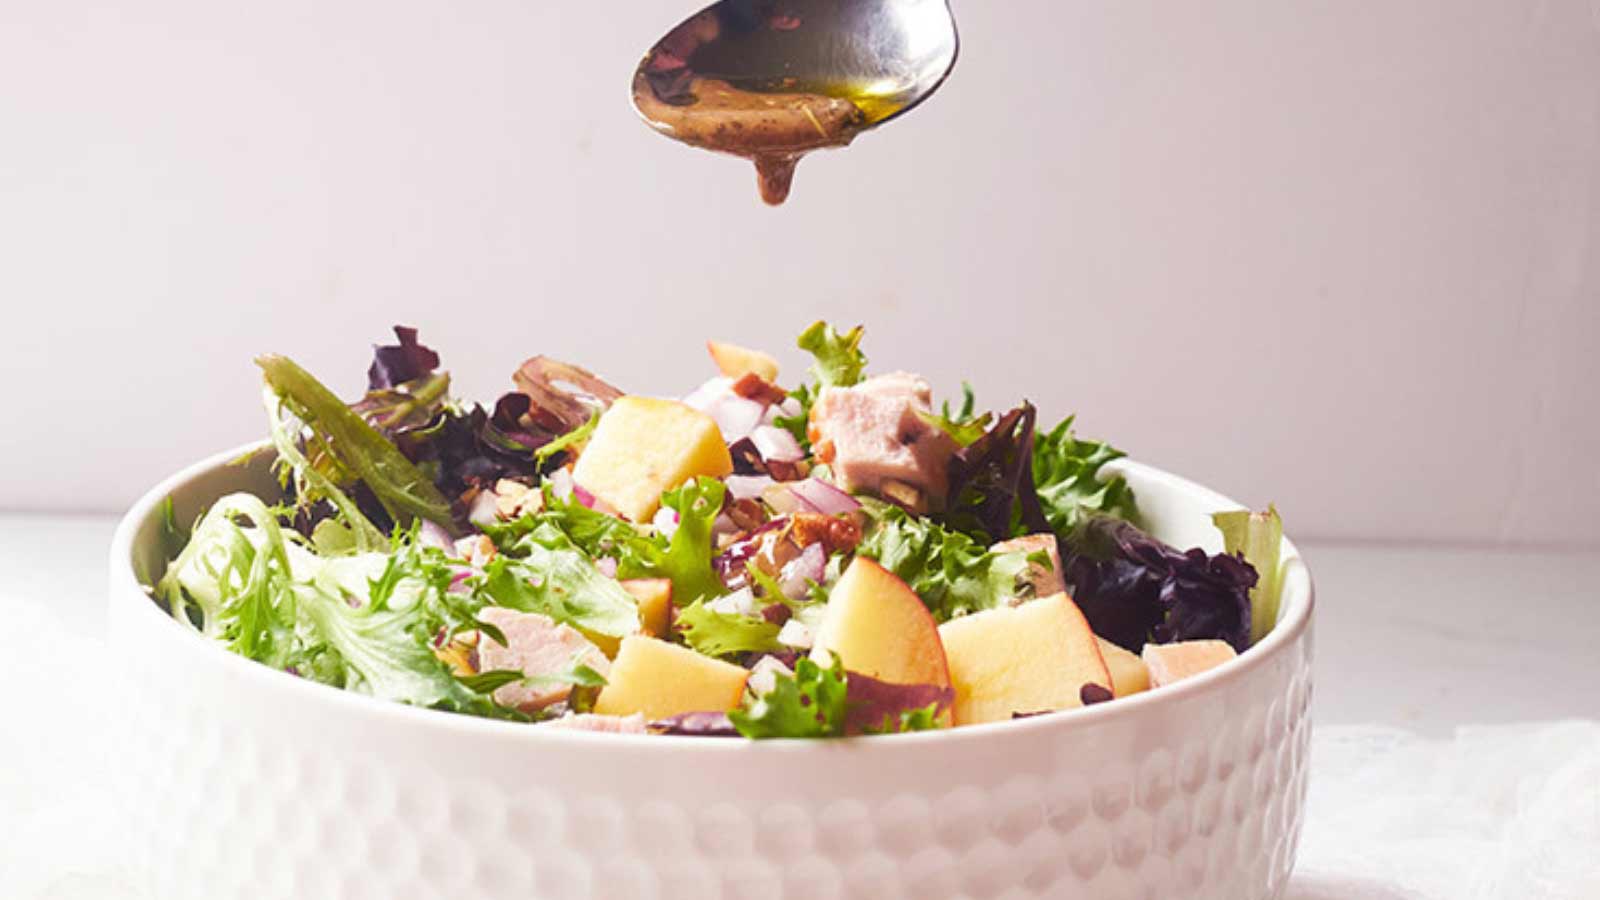 17 Amazing Salads That Make A Meal In Themselves